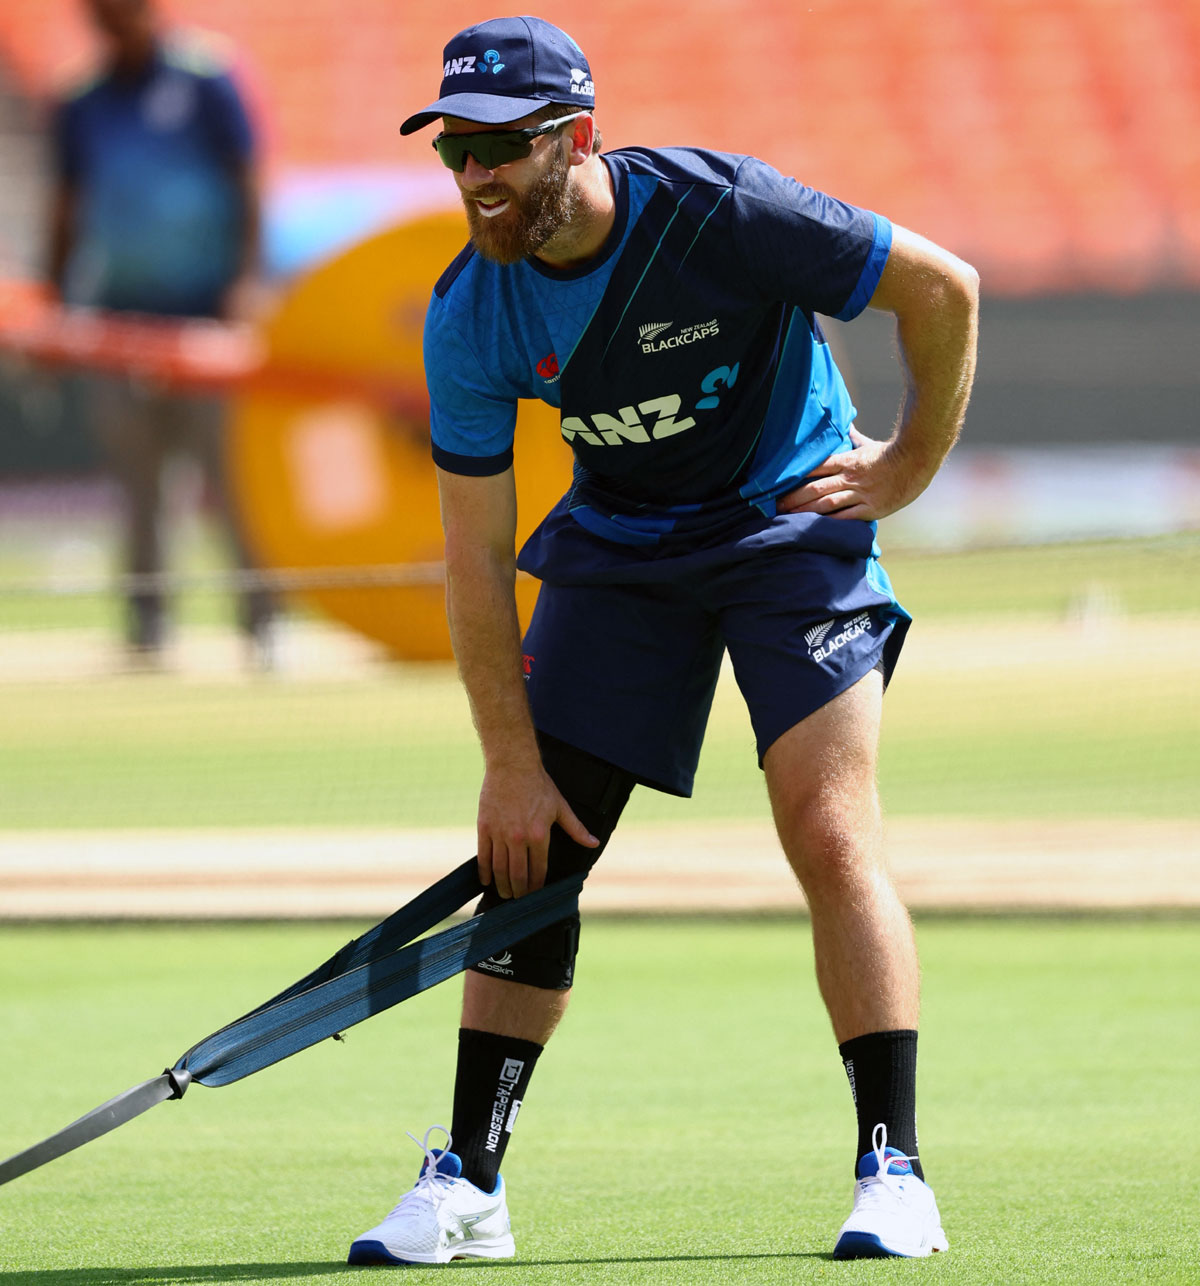 Another injury blow for Kane Williamson